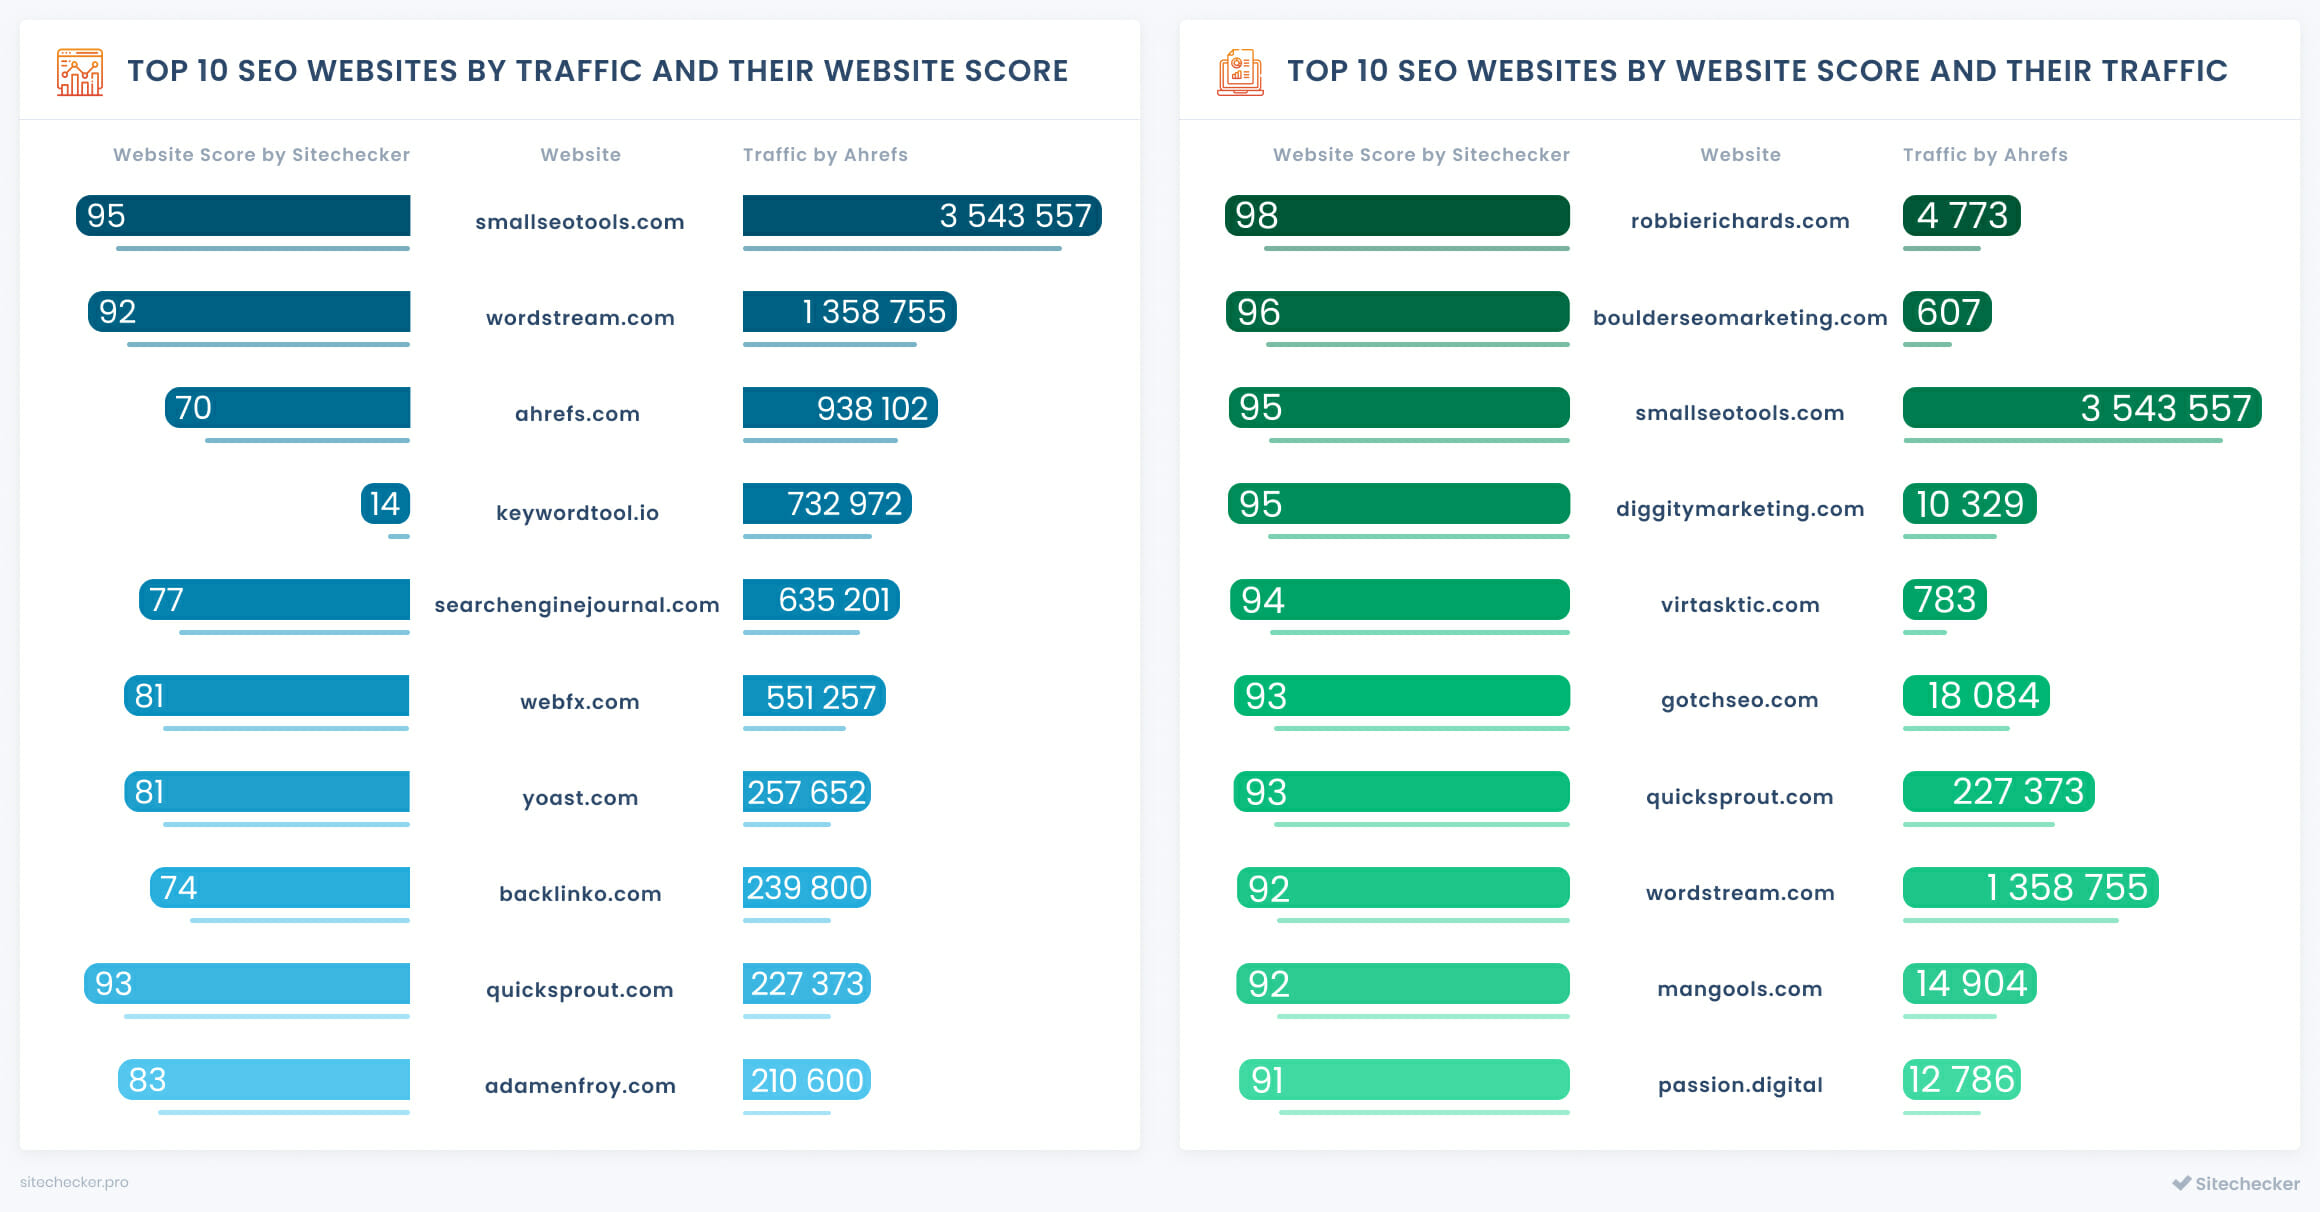 Top SEO Companies in the World Ranked by Website Score